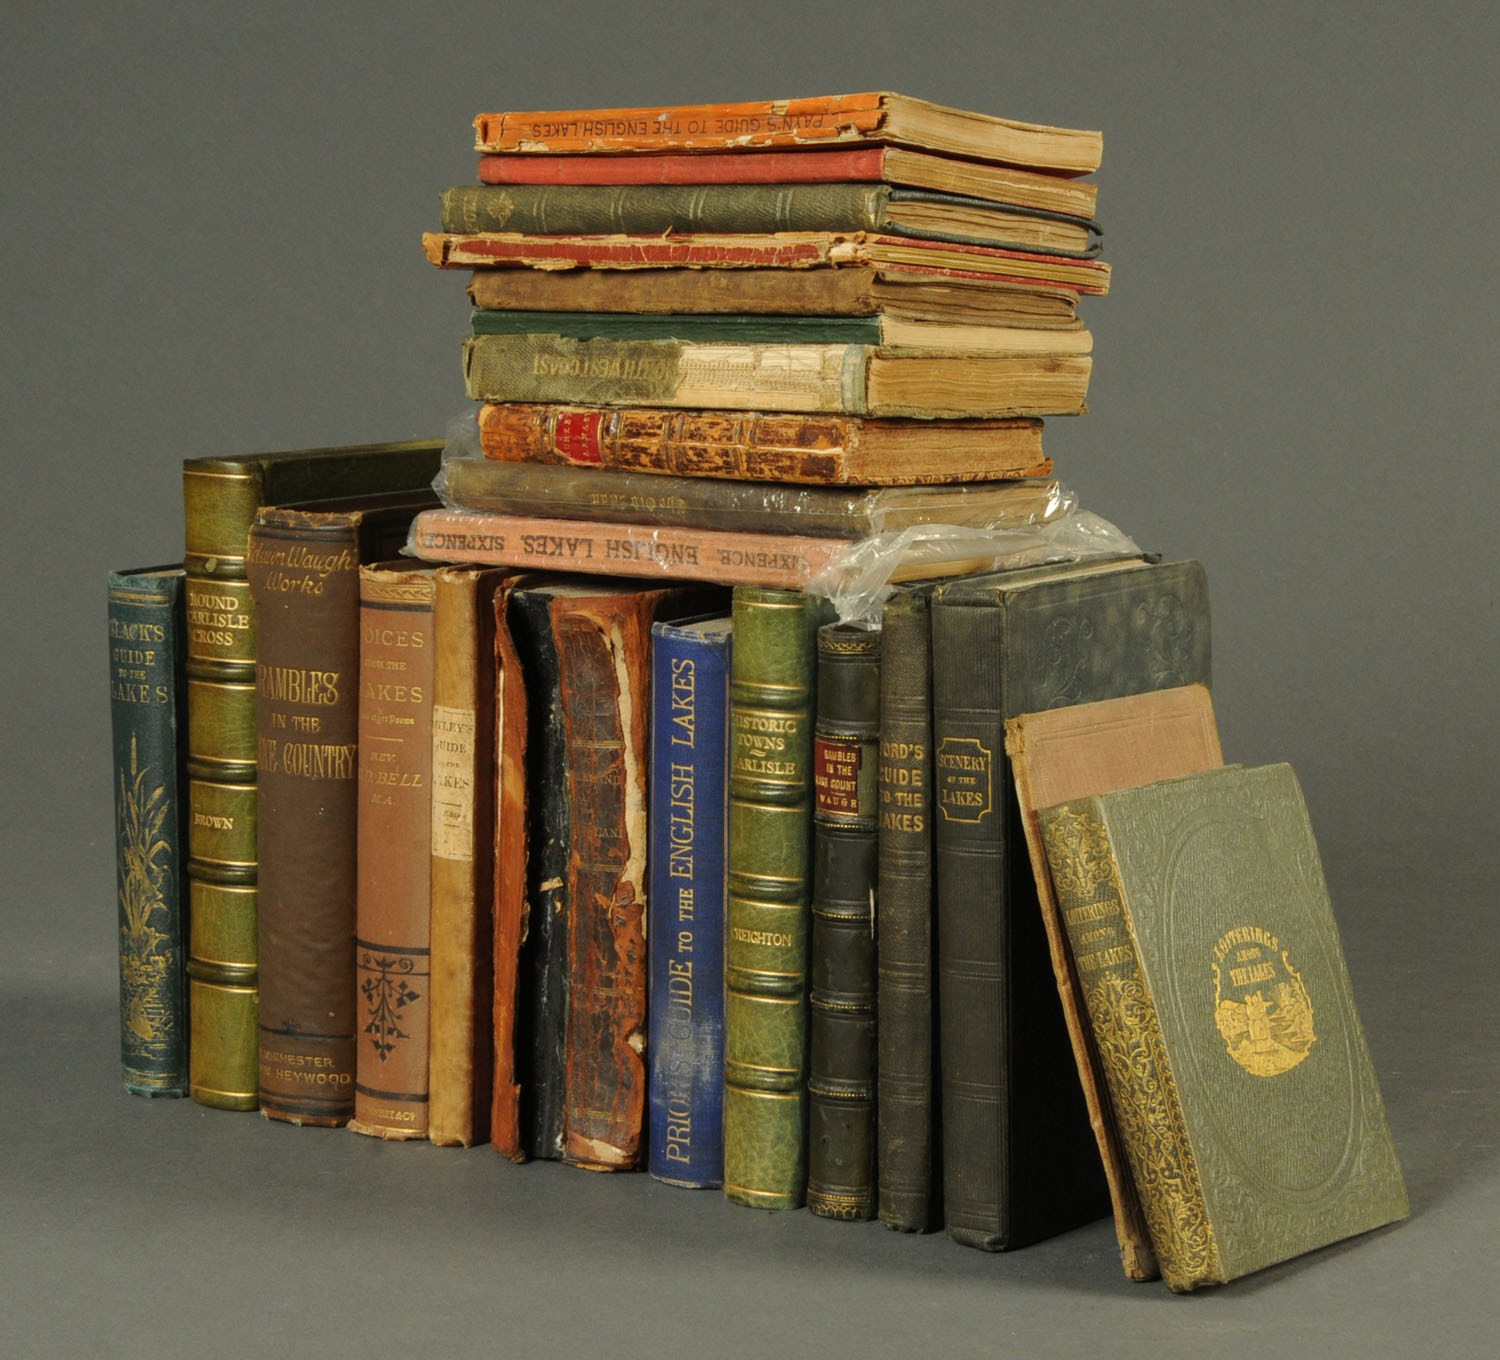 A collection of local antiquarian books, "Round Carlisle Cross" by Brown, "Historic Towns,